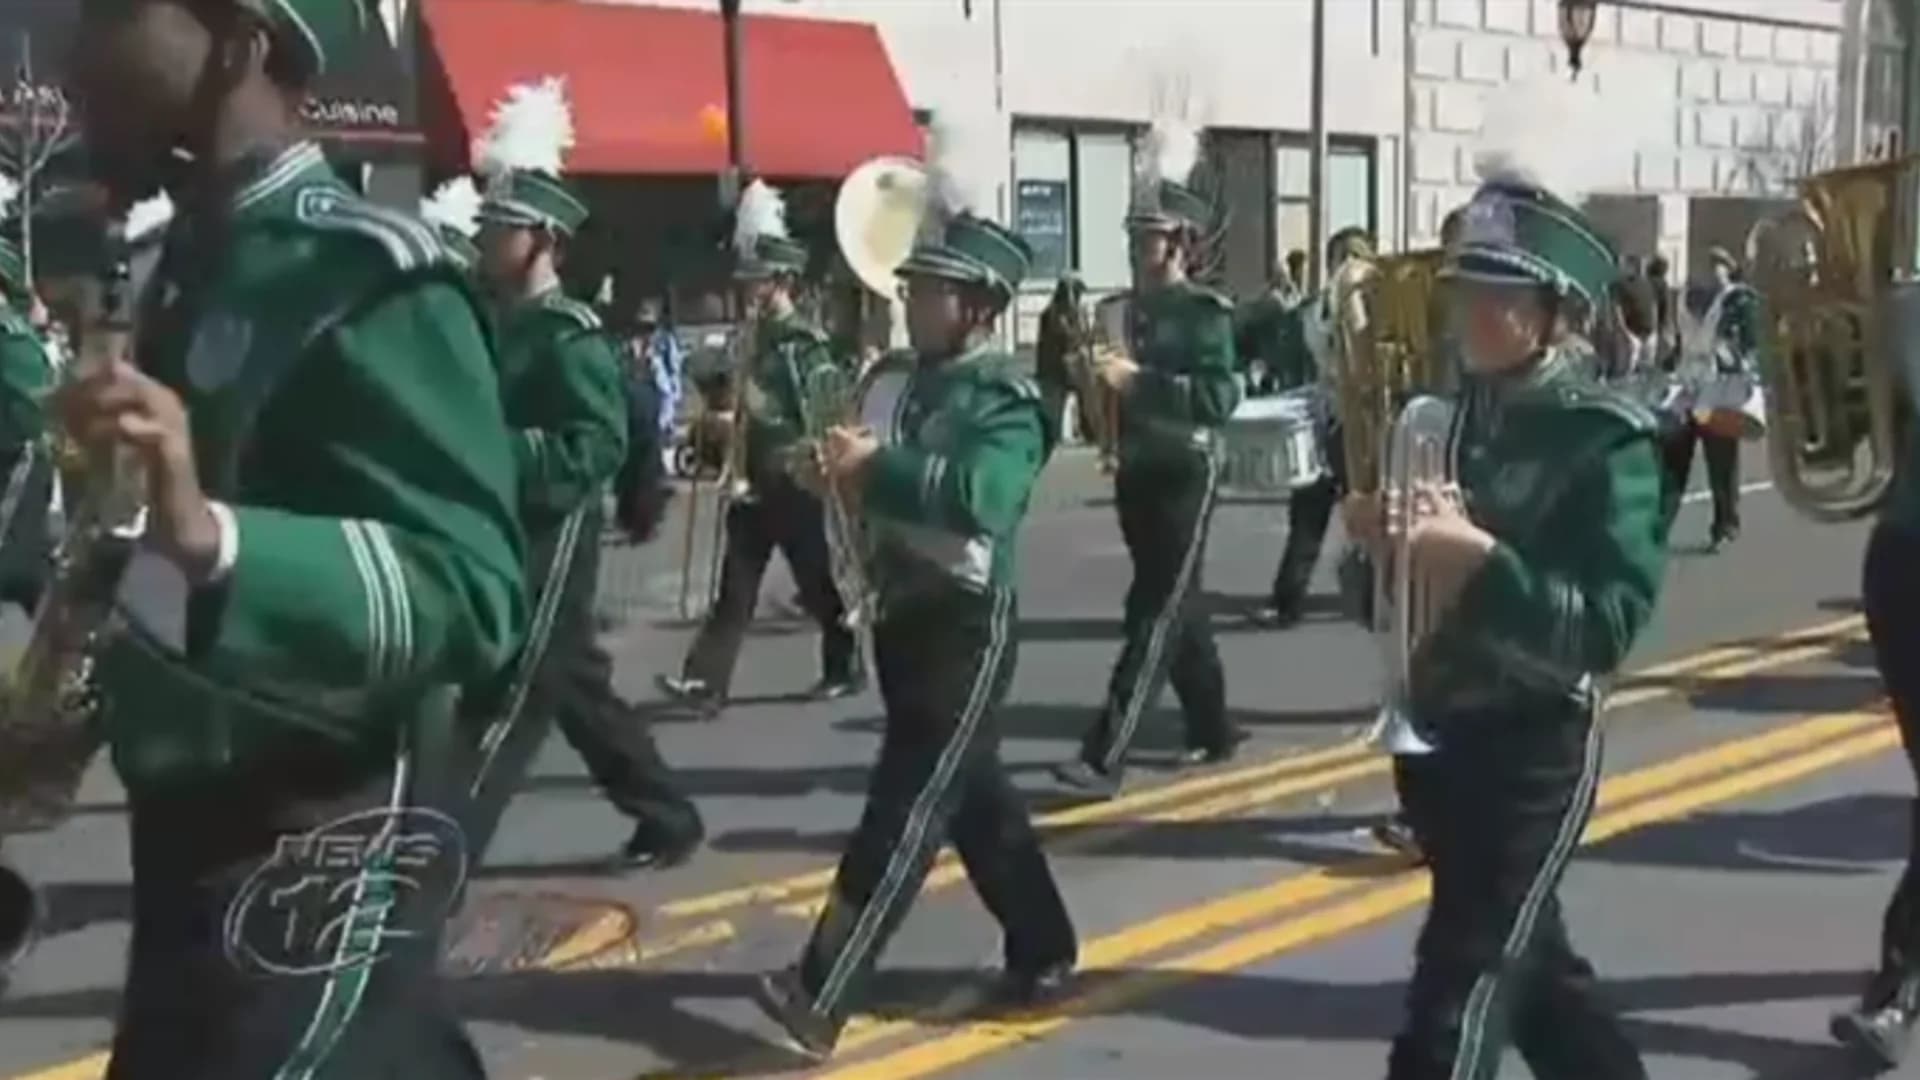 Submit Your 2020 Connecticut St. Patrick's Day Photos